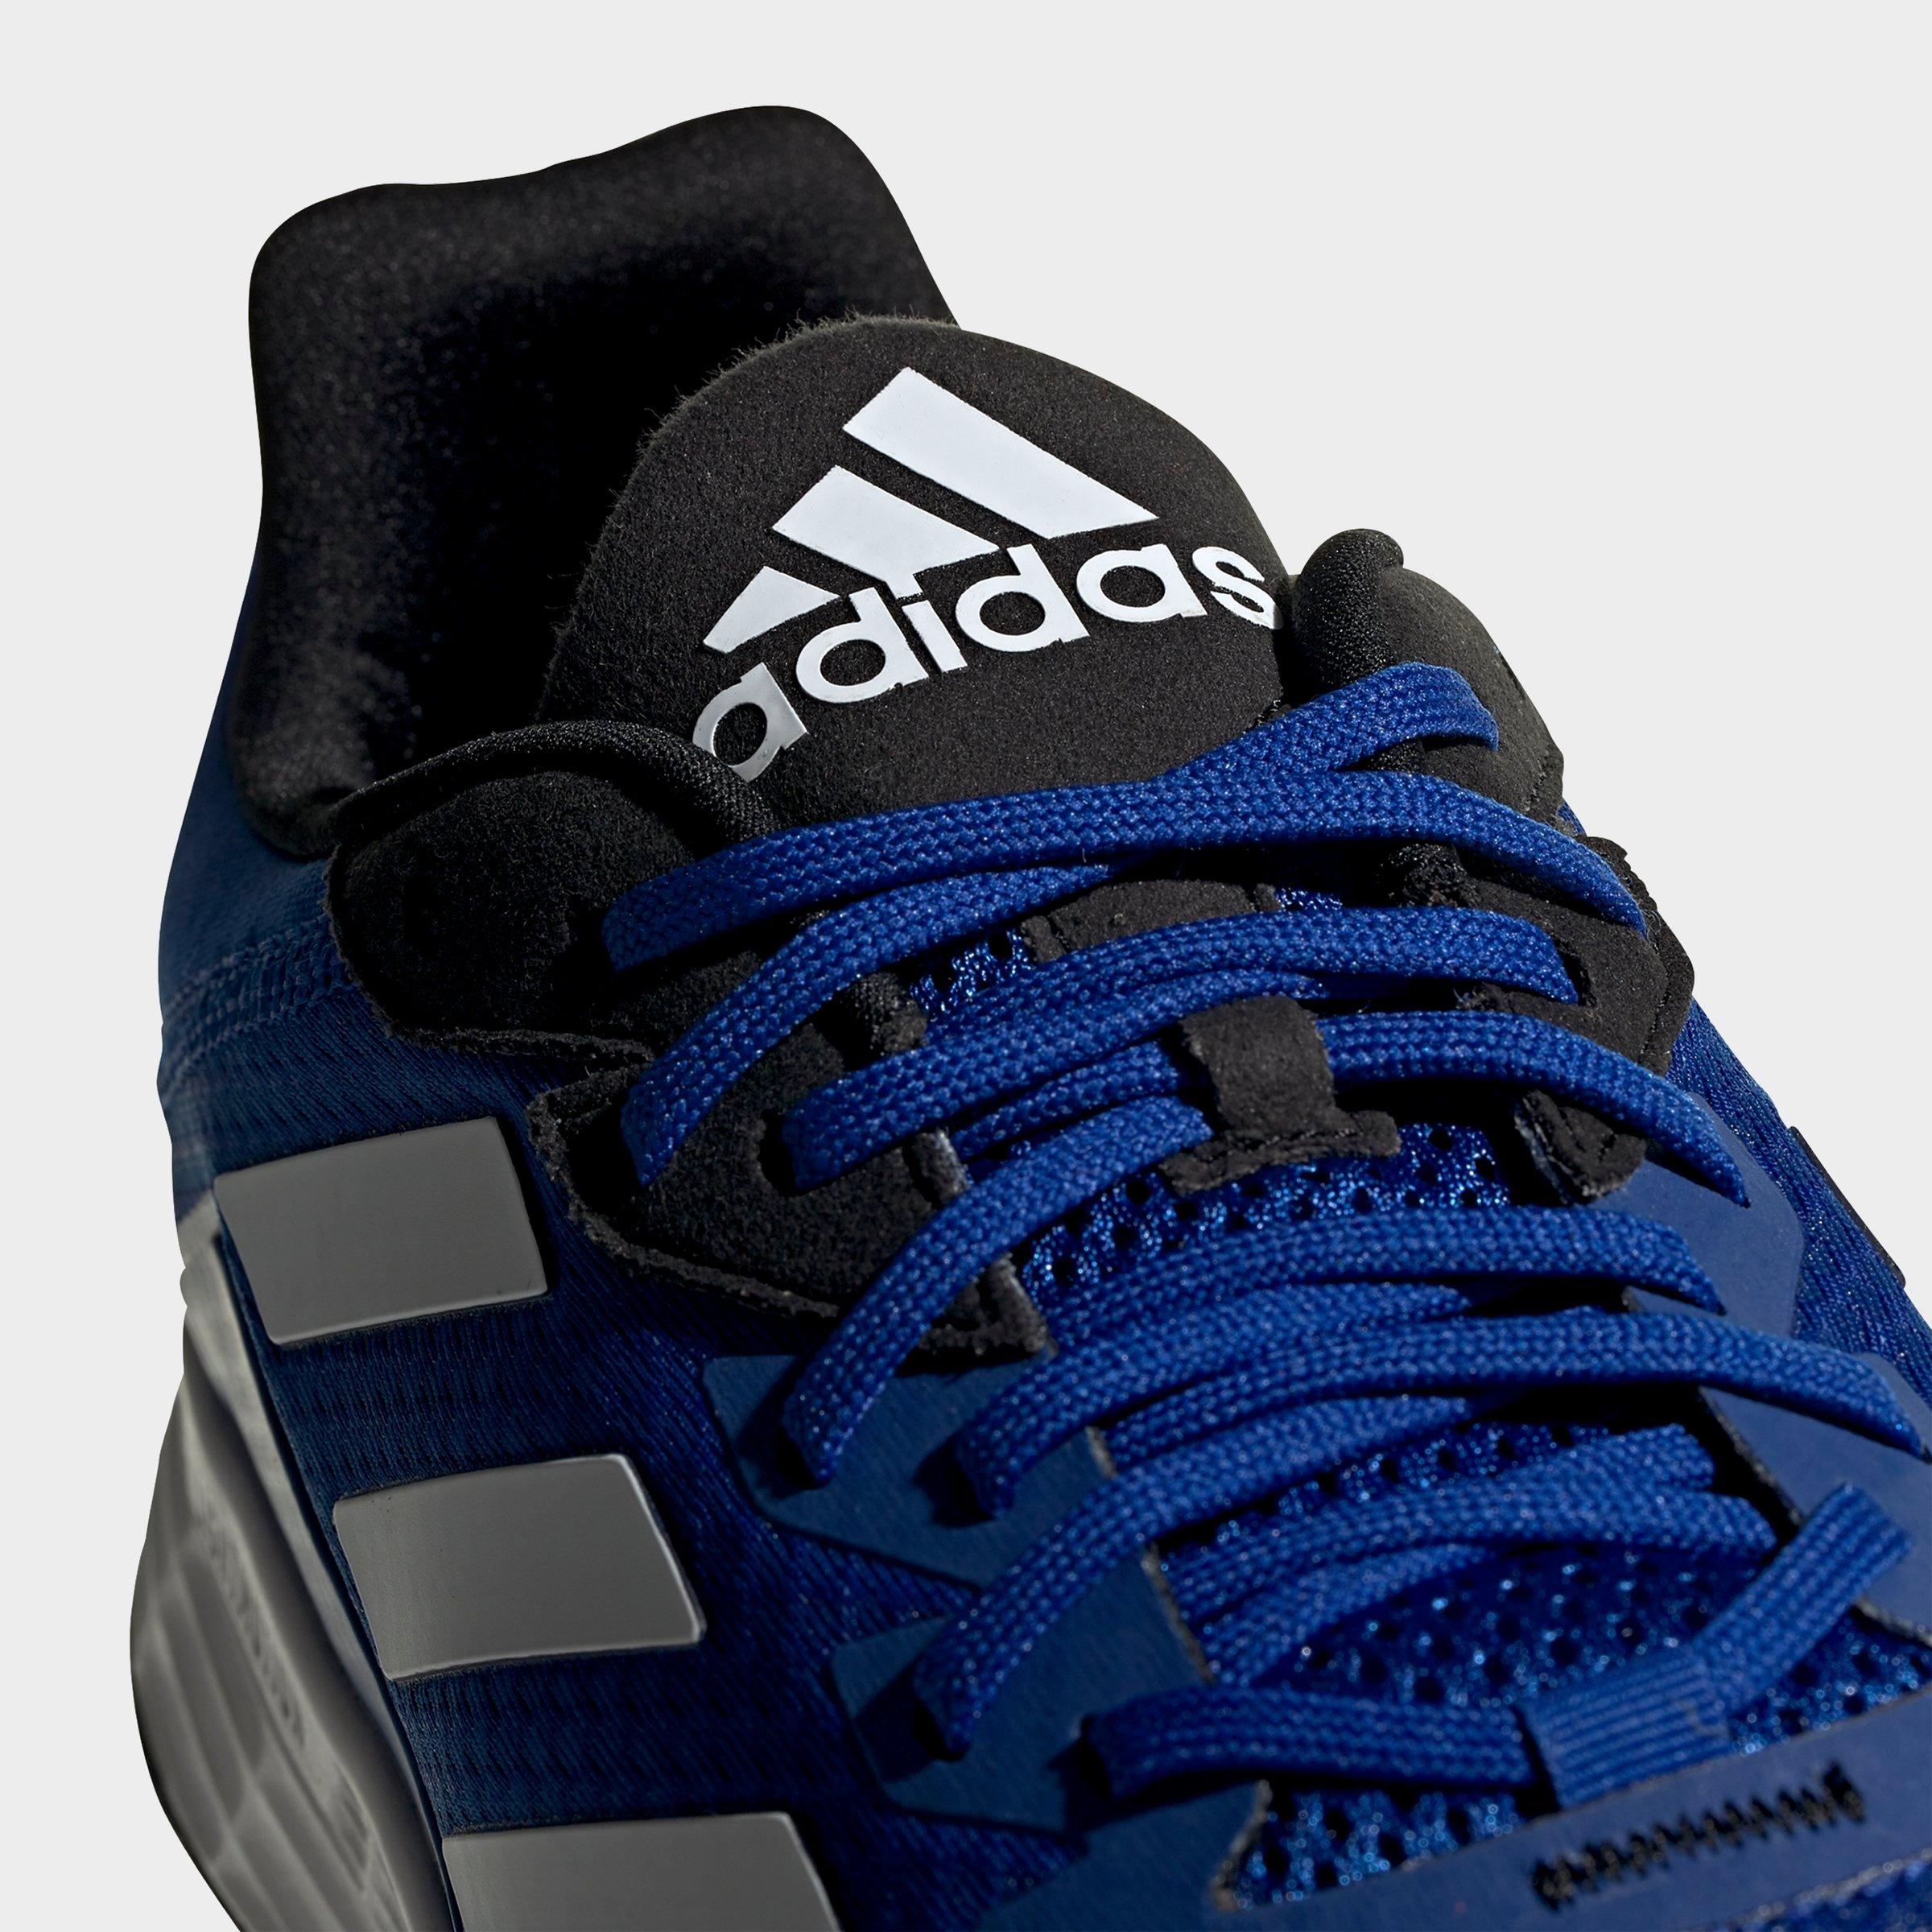 mens adidas shoes wide width